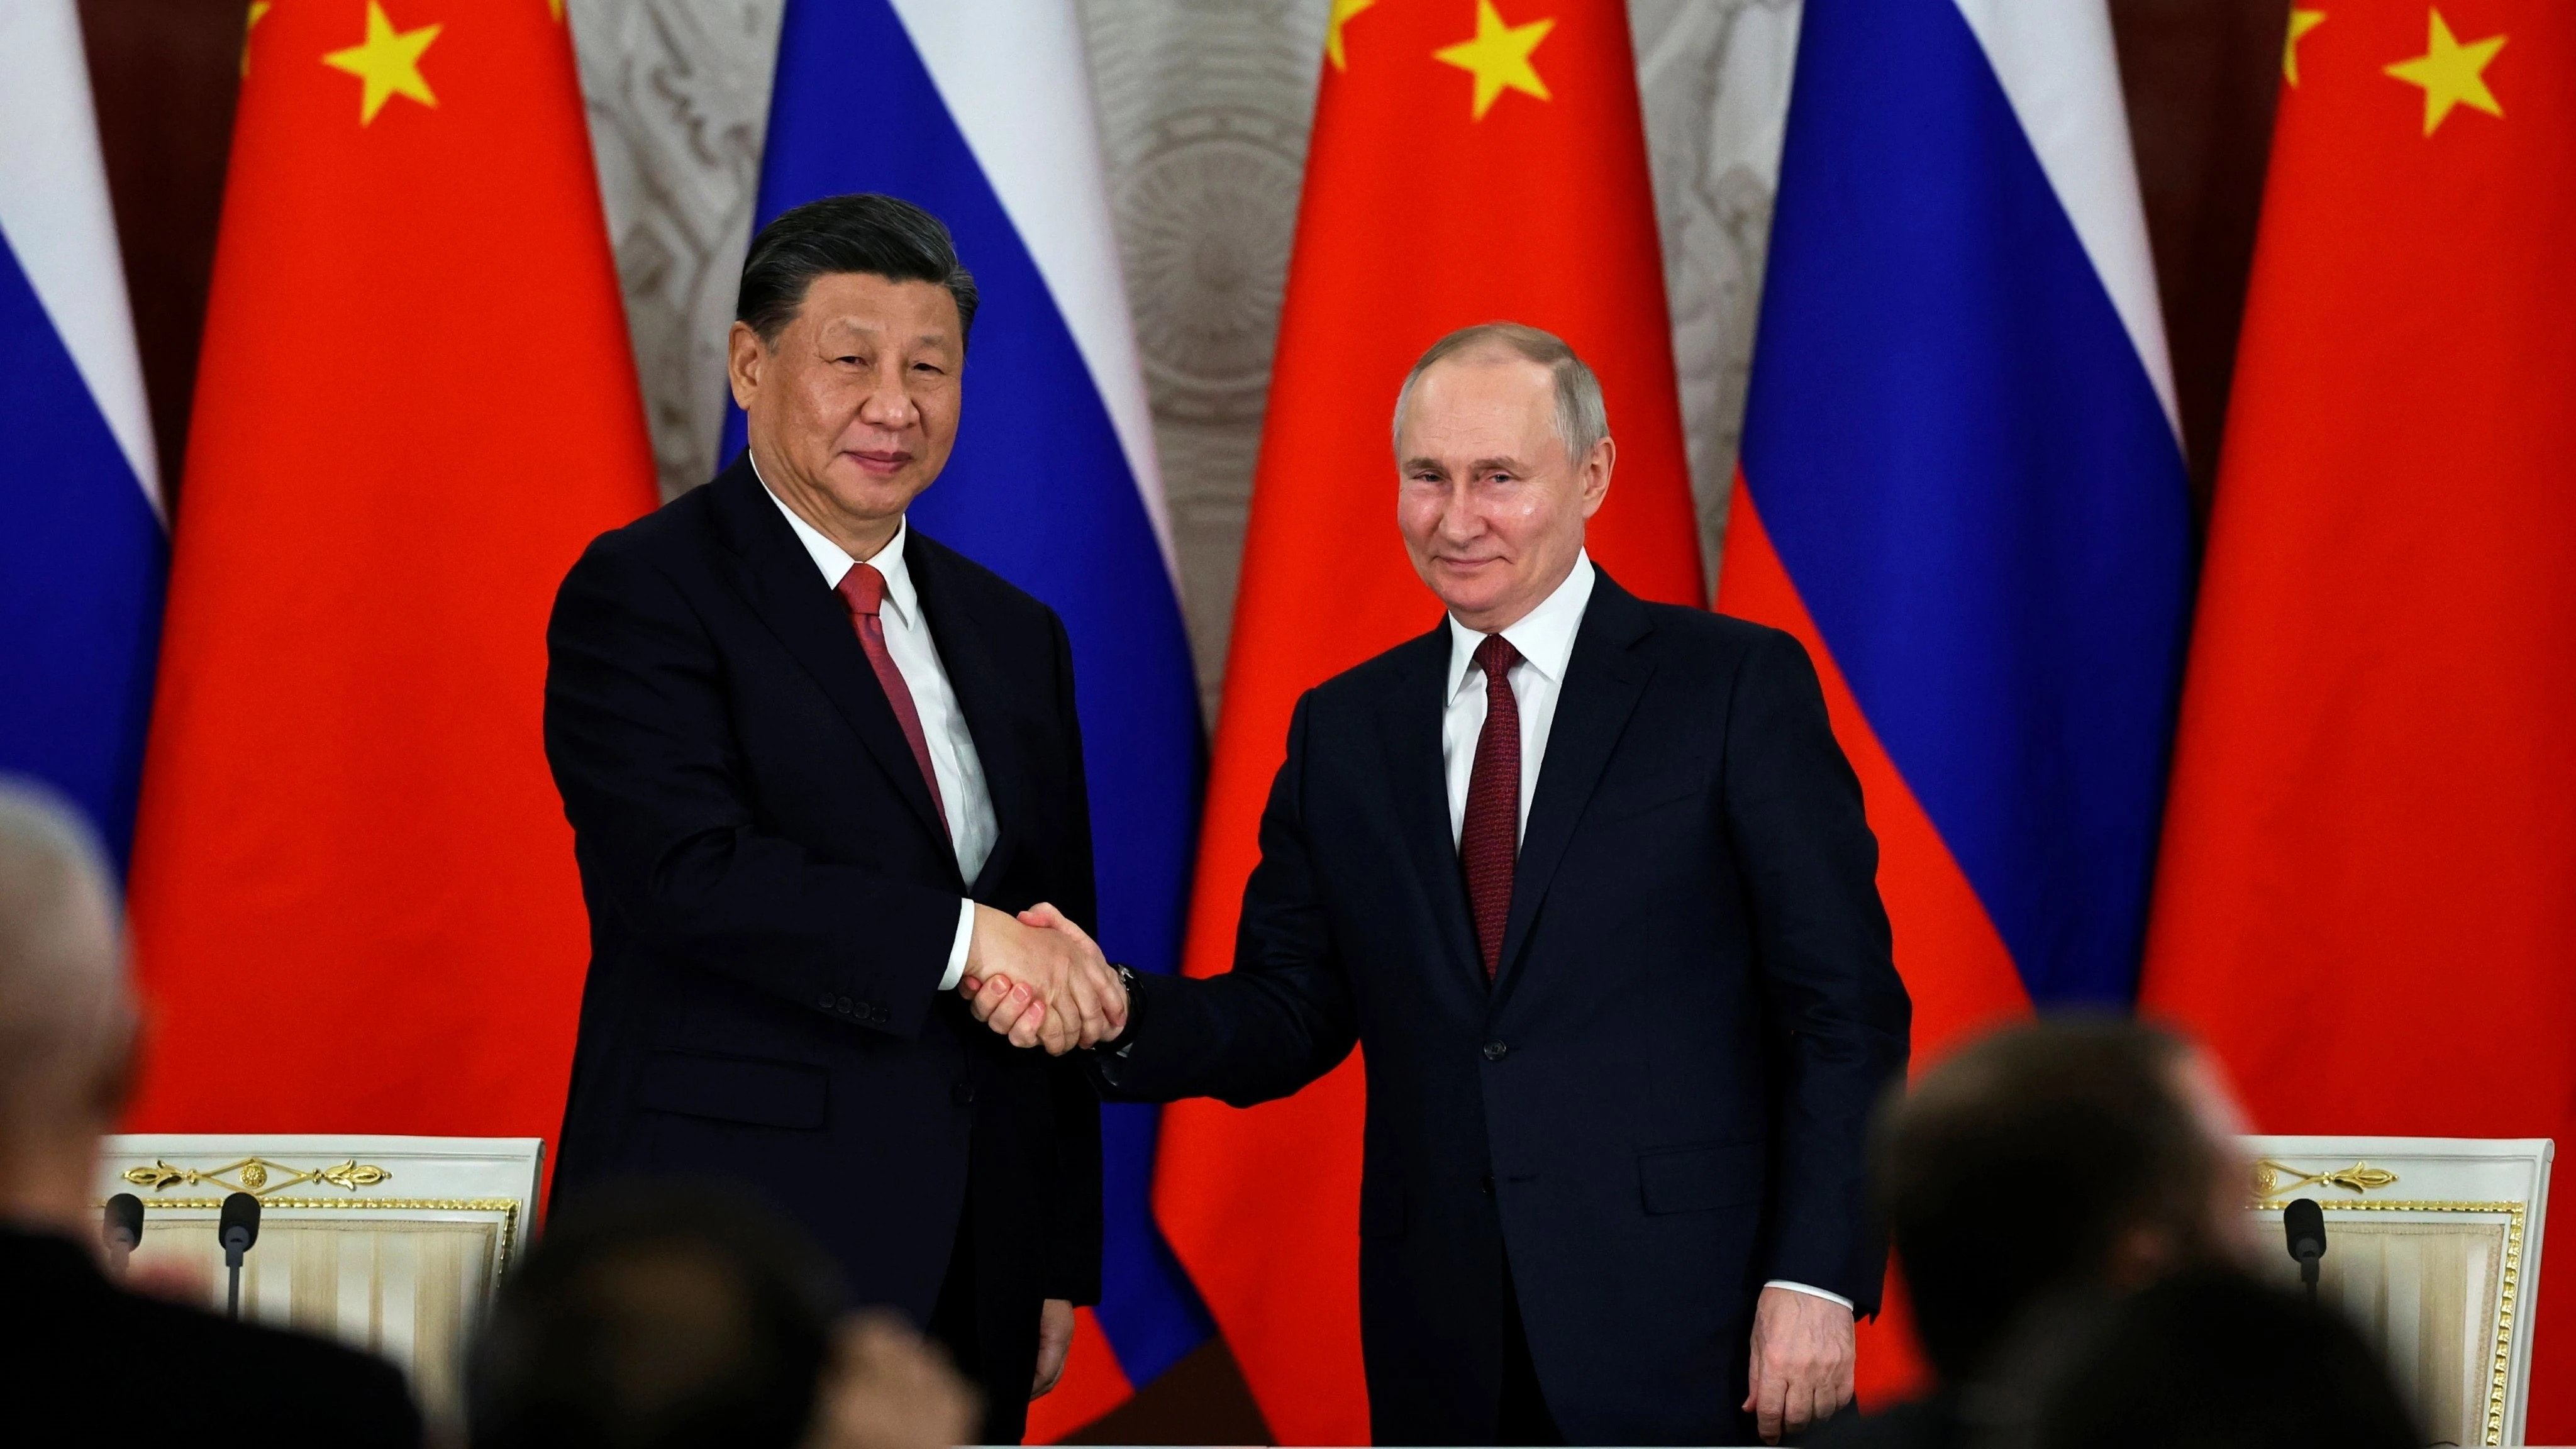 Assessing China’s Role as a Mediator in the Russia-Ukraine Conflict and Crisis